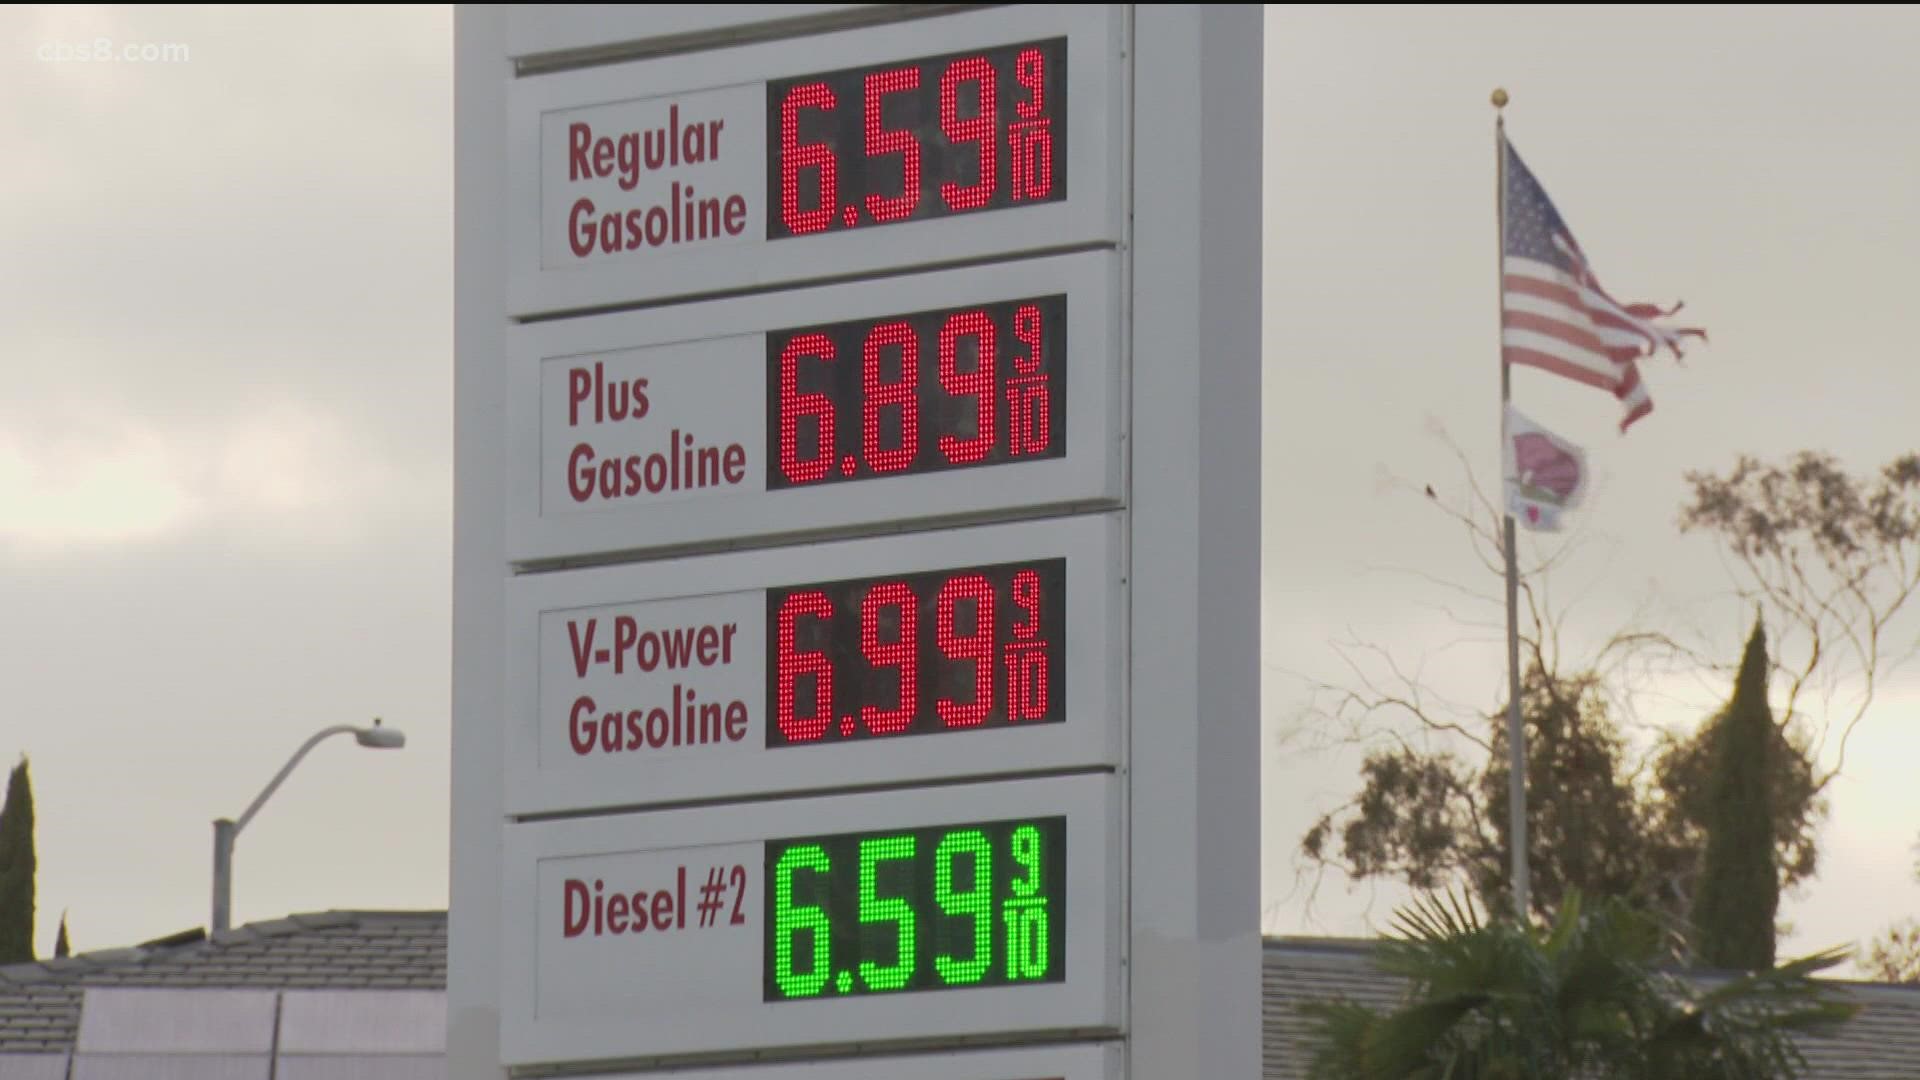 Gas prices have yet again broke records at the local, state and national levels, with prices edging toward $6 a gallon here in California on average.